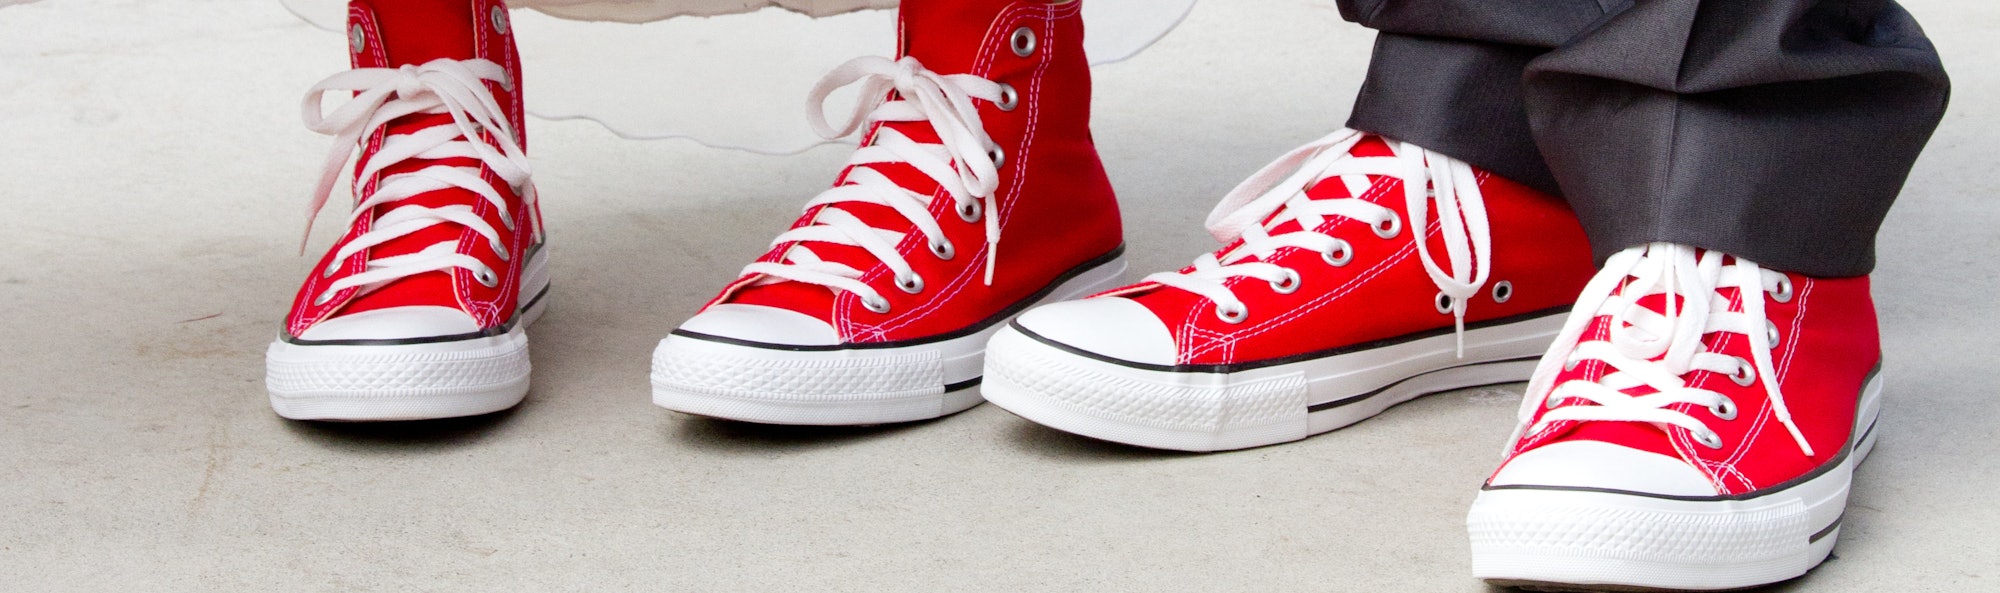 Bride and groom in wedding attire wearing red hi-top (high top) canvas sneakers with white laces.  L...